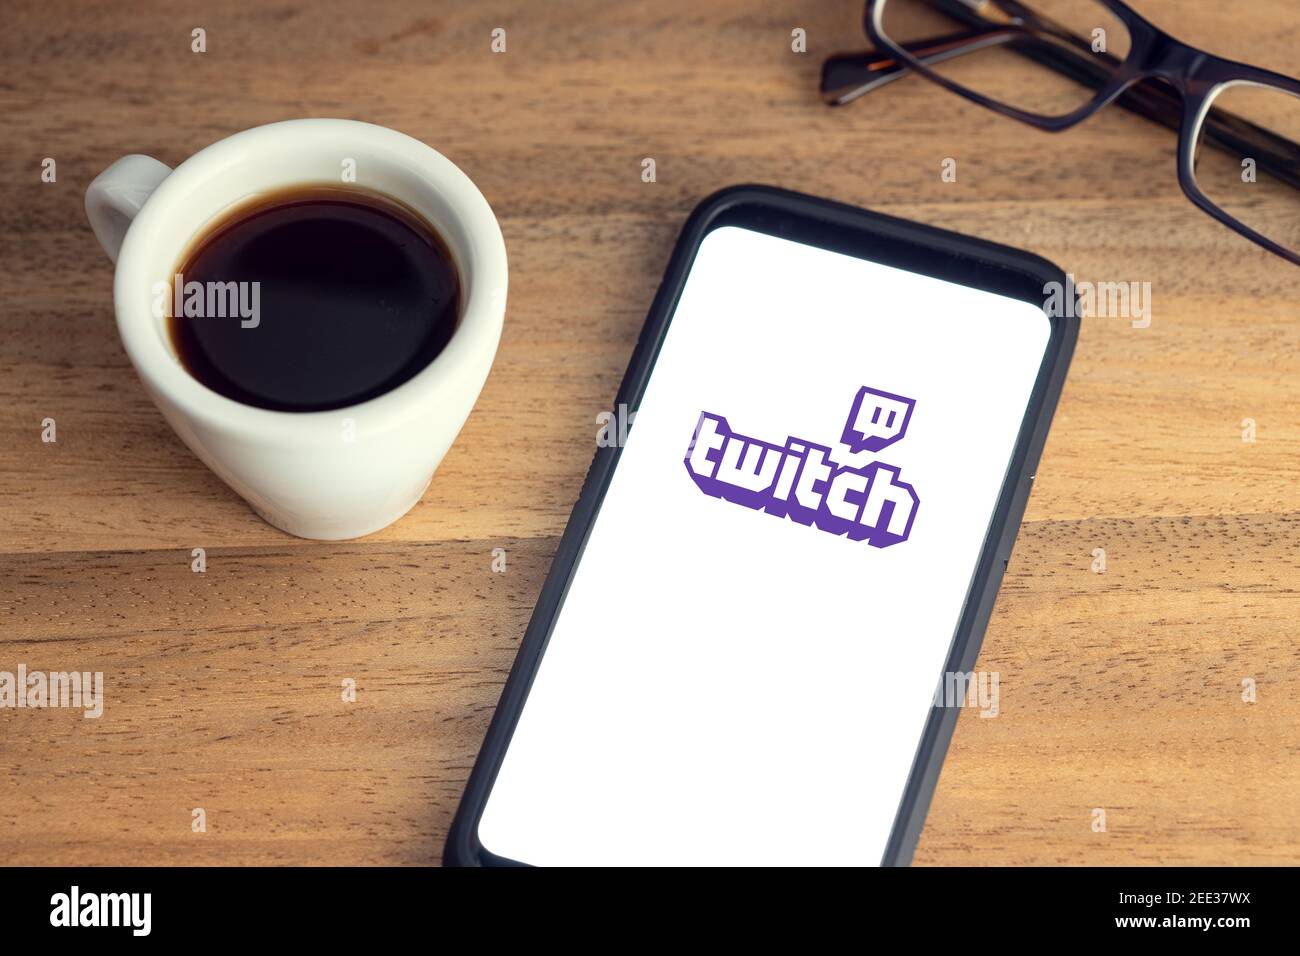 Galicia, Spain; february 15, 2021: Twitch logo on Smart phone screen on desk with eyeglasses and cup of coffee on wooden table Stock Photo